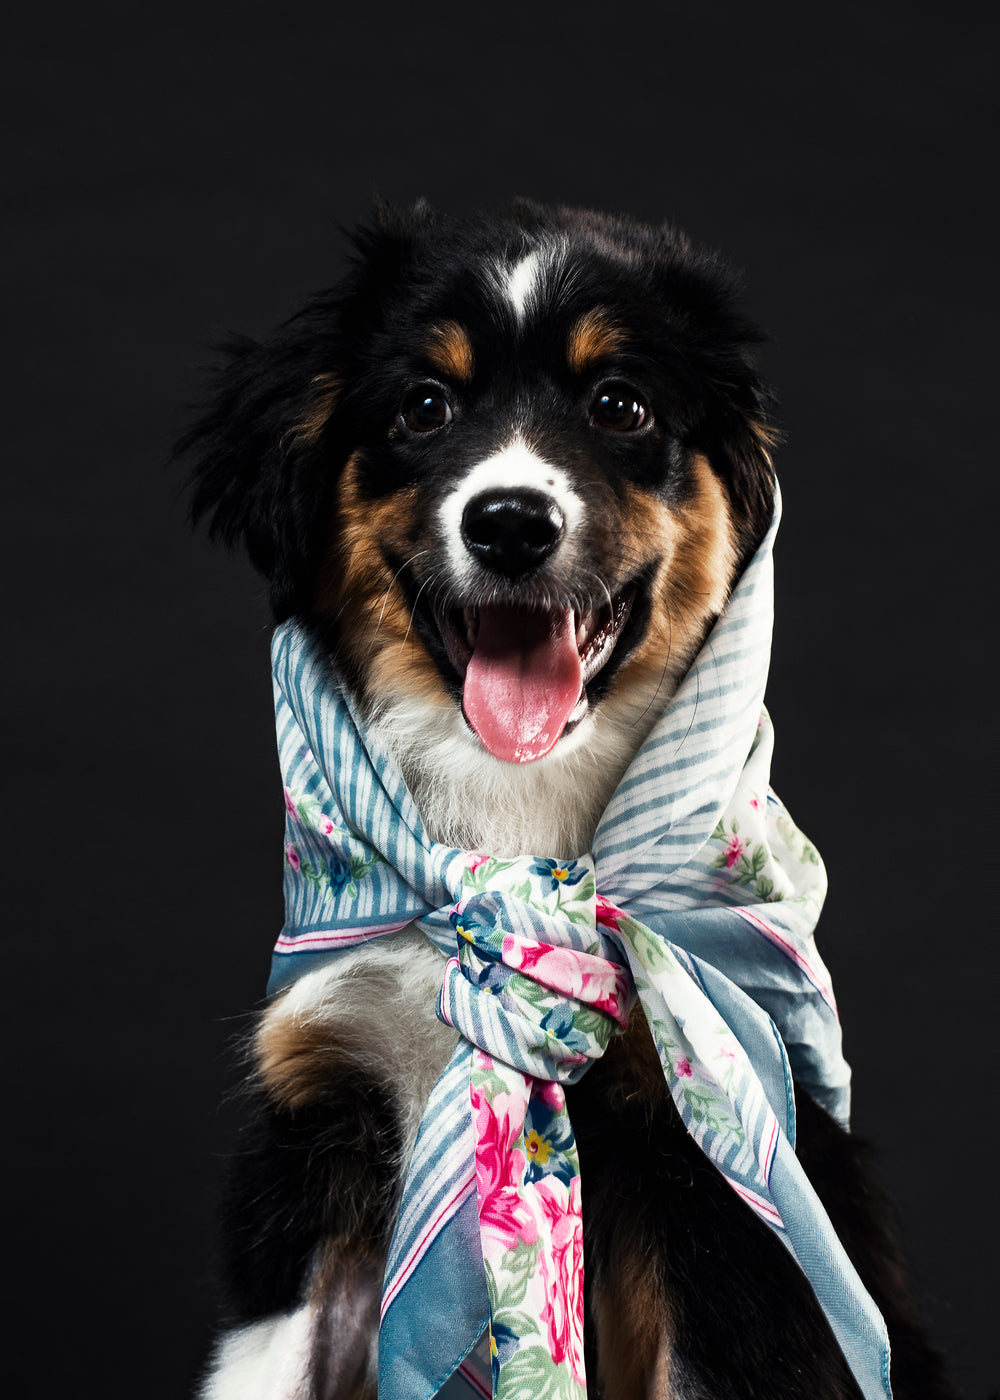 a smiling black and tan dog with floral necktie